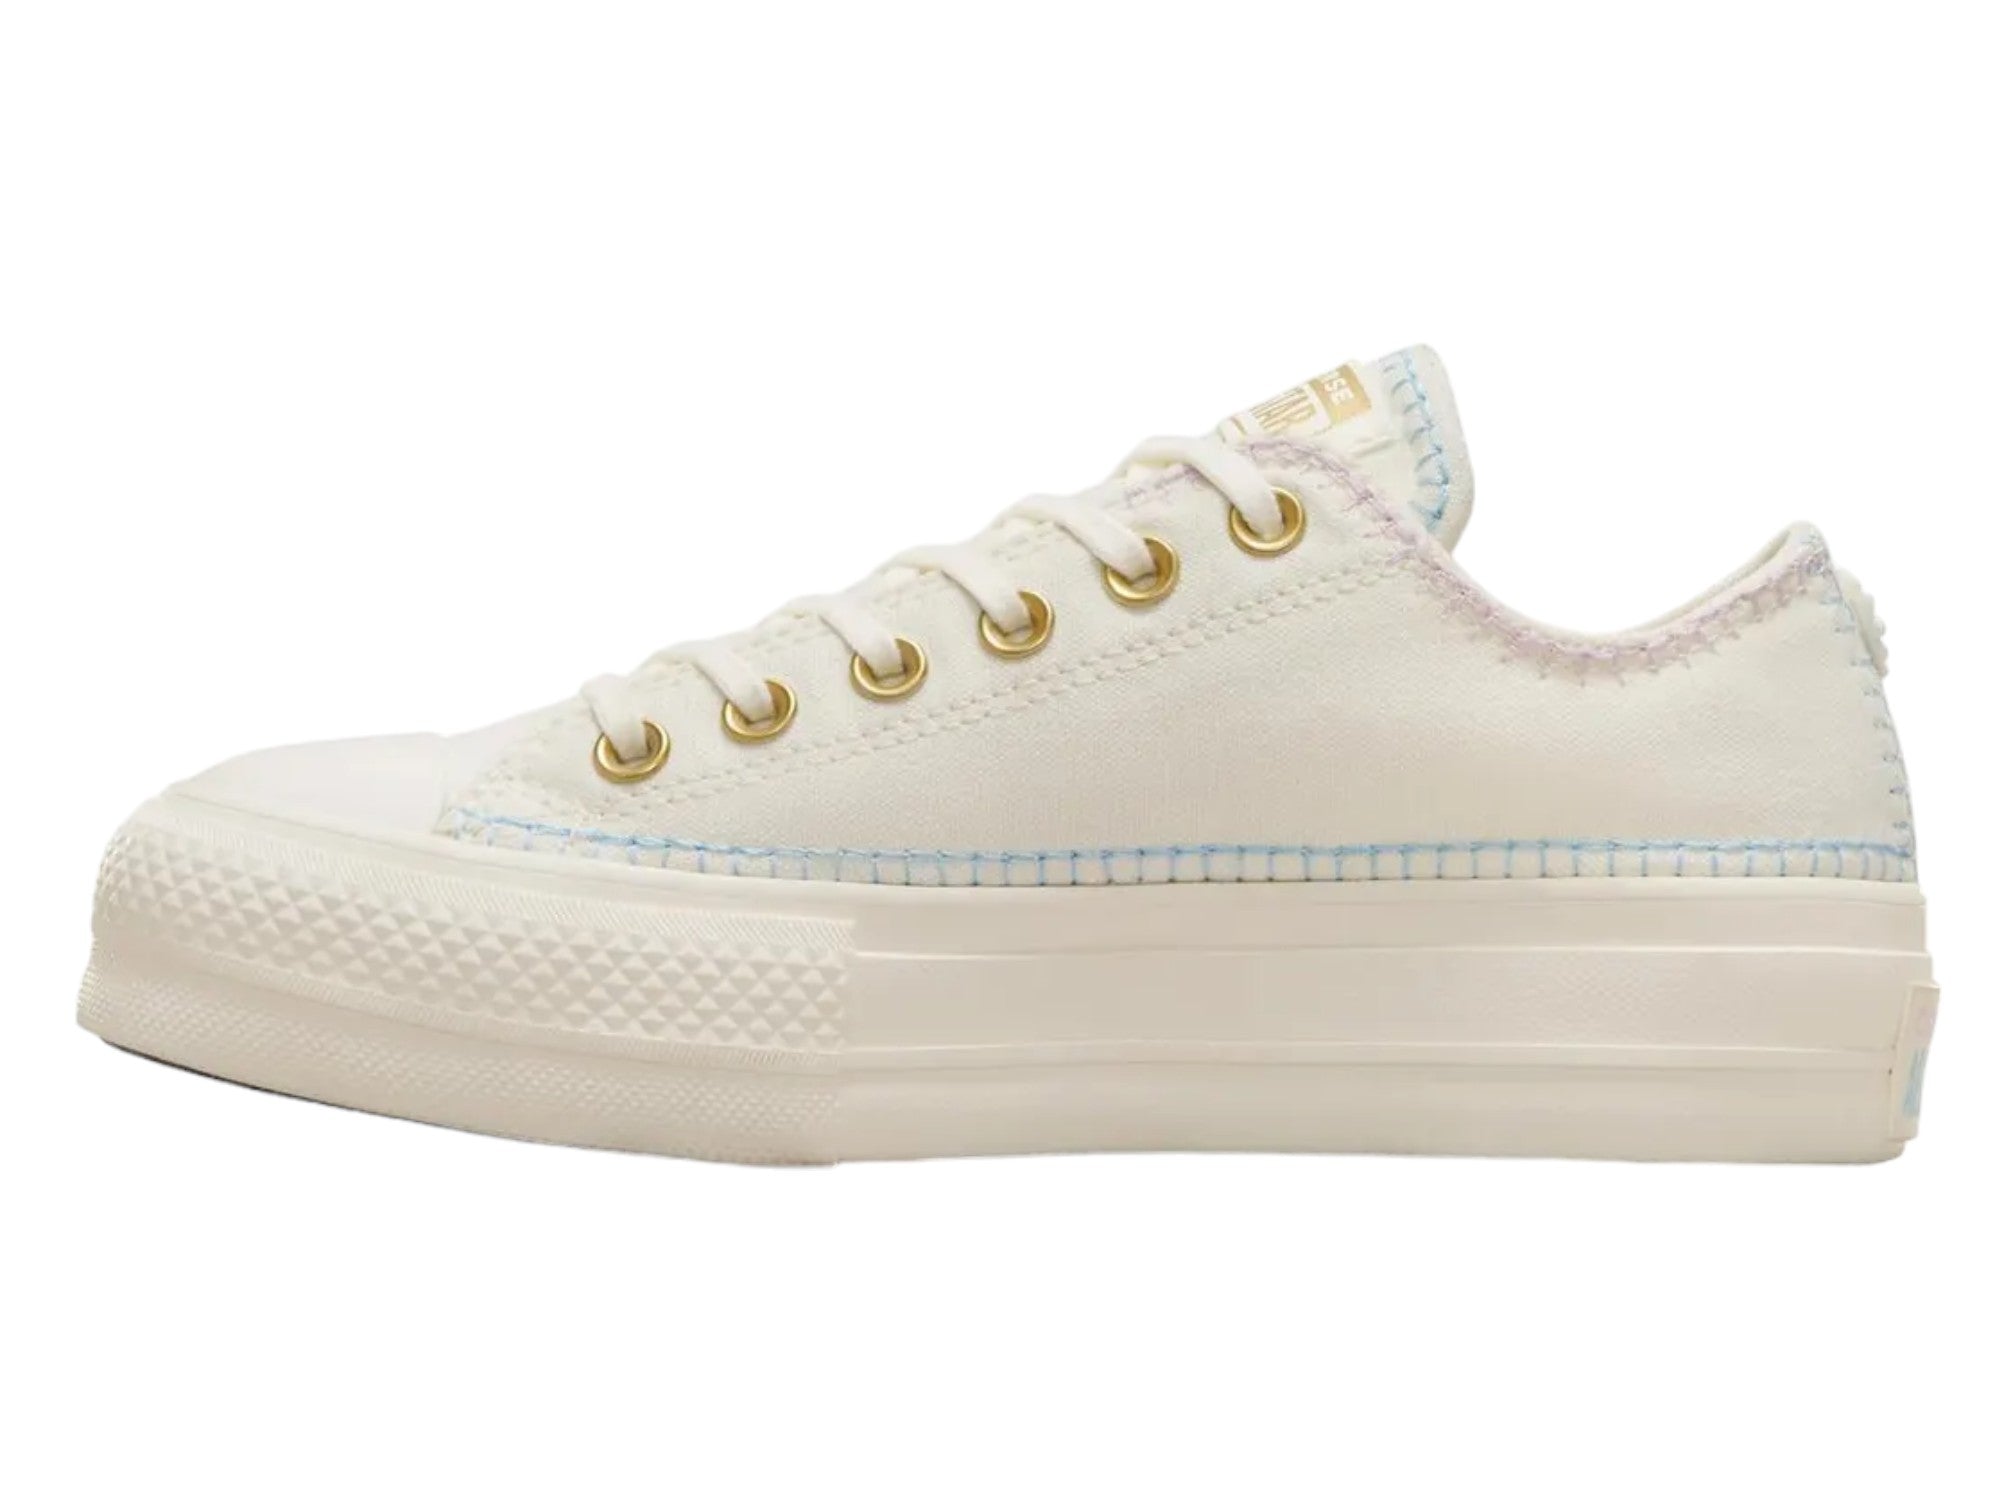 Converse Chuck Taylor Lift Crafted Stitching Low Sneaker - Women's